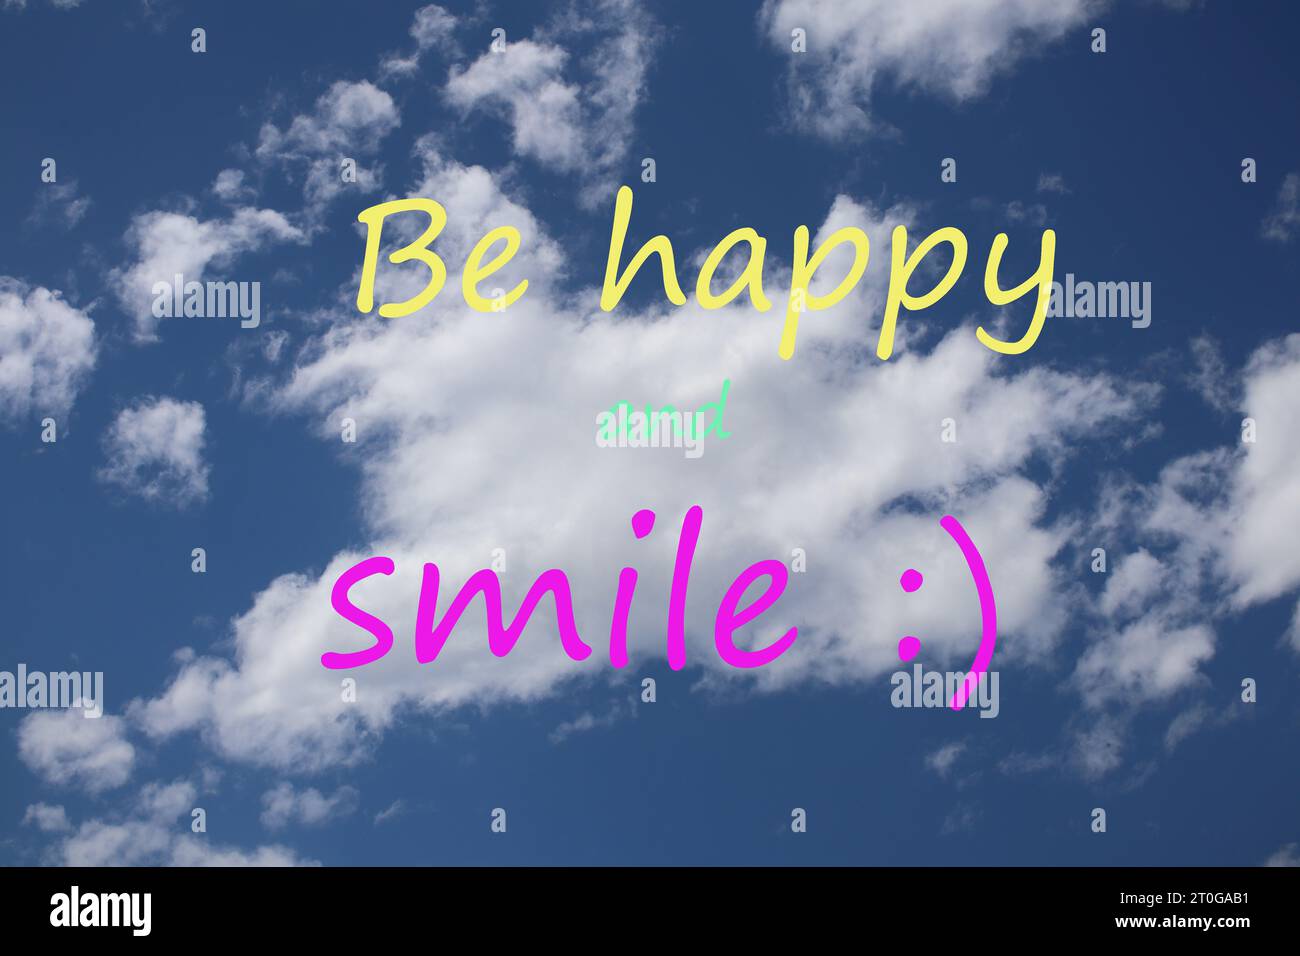 Quote. Saying. Motivational and inspirational quotes - Be happy and smile. Stock Photo